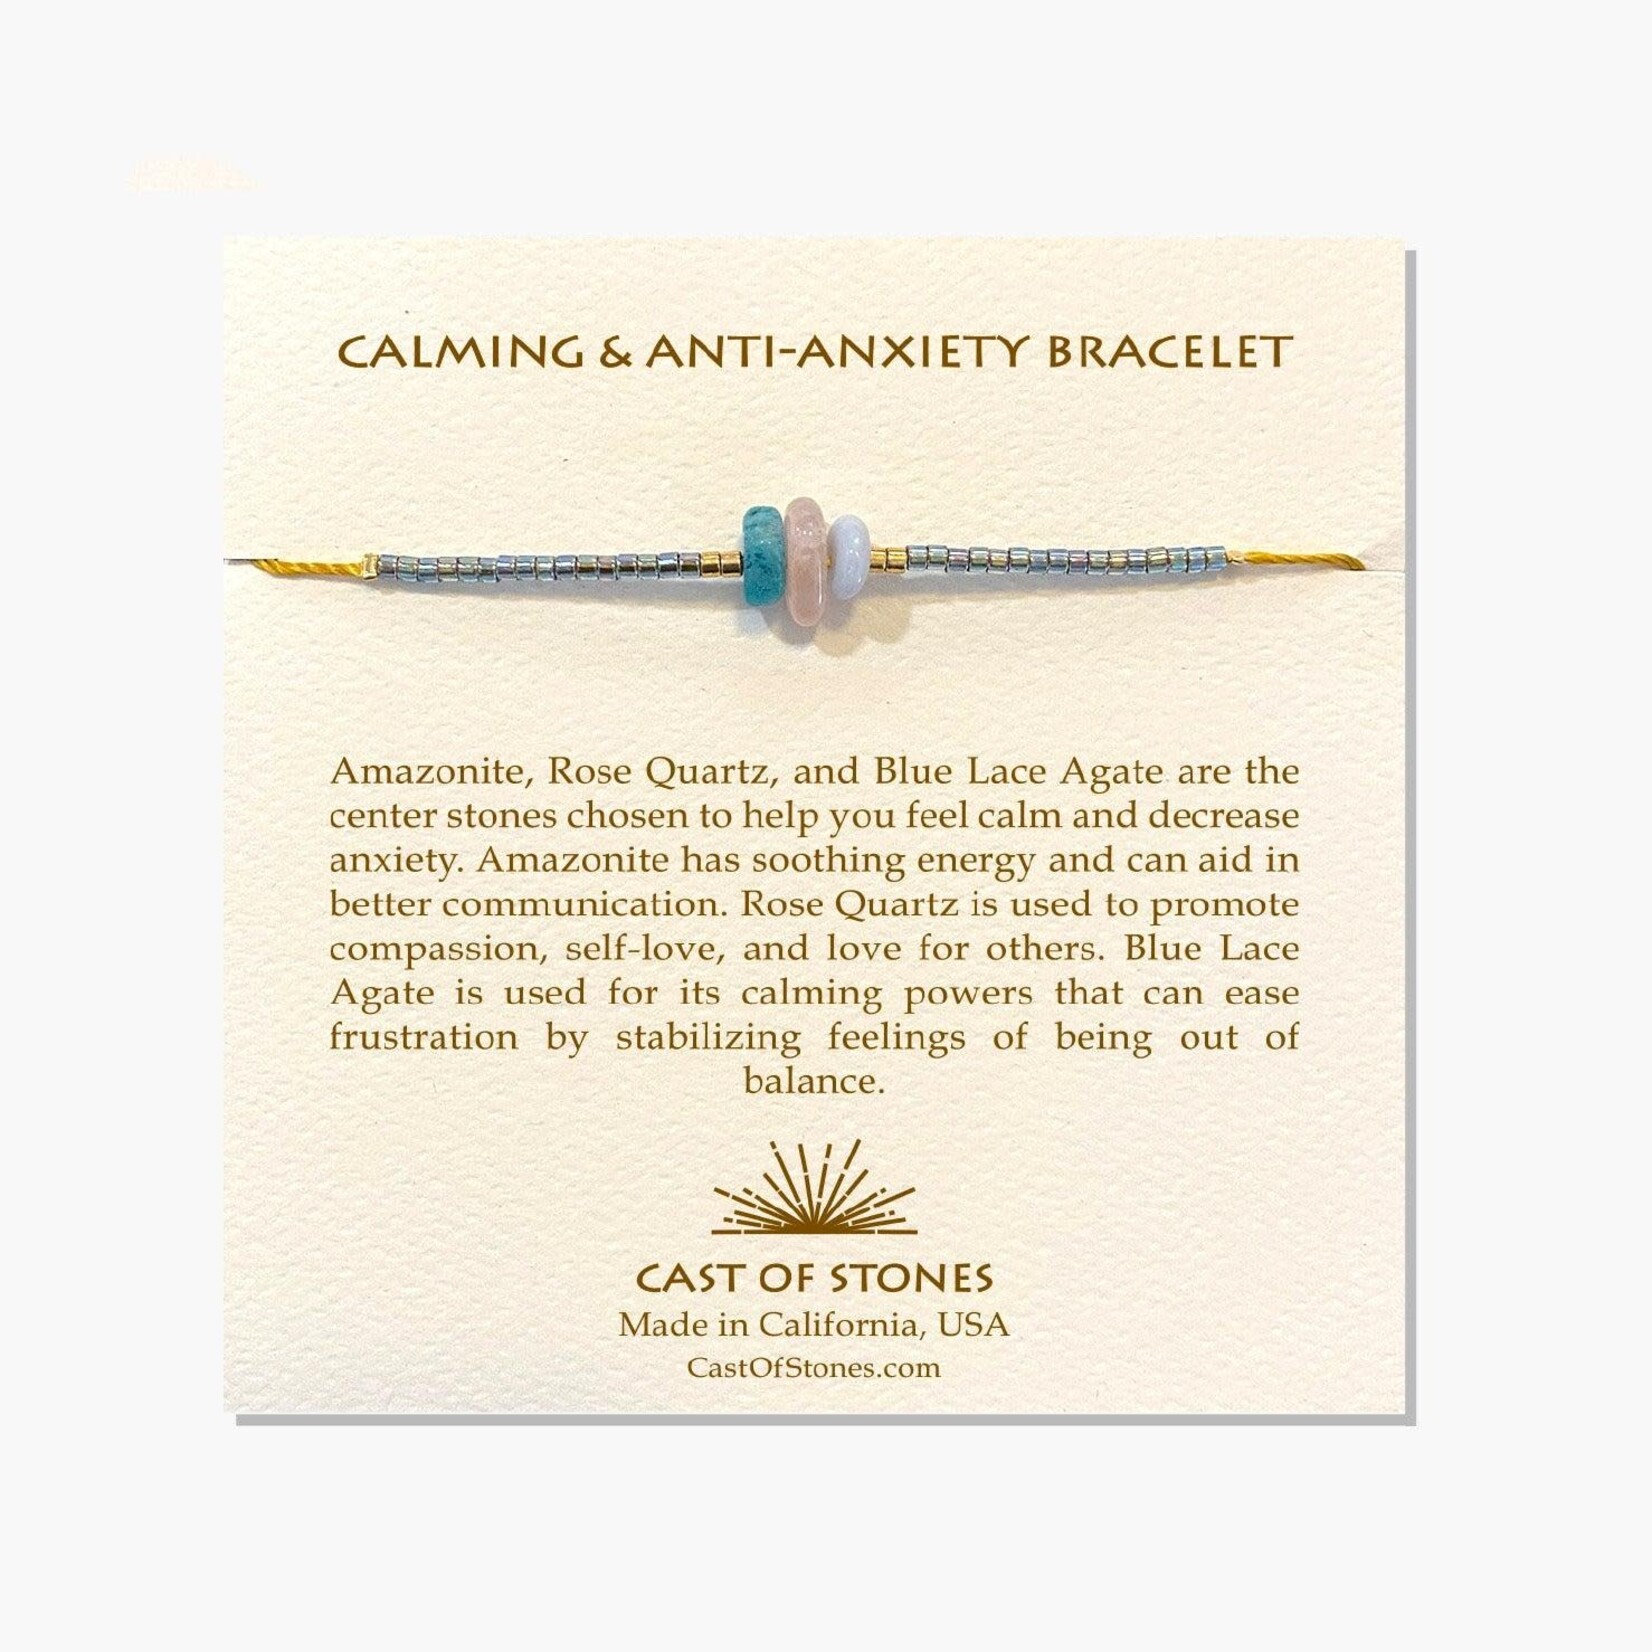 Calming and Anti-Anxiety Bracelet